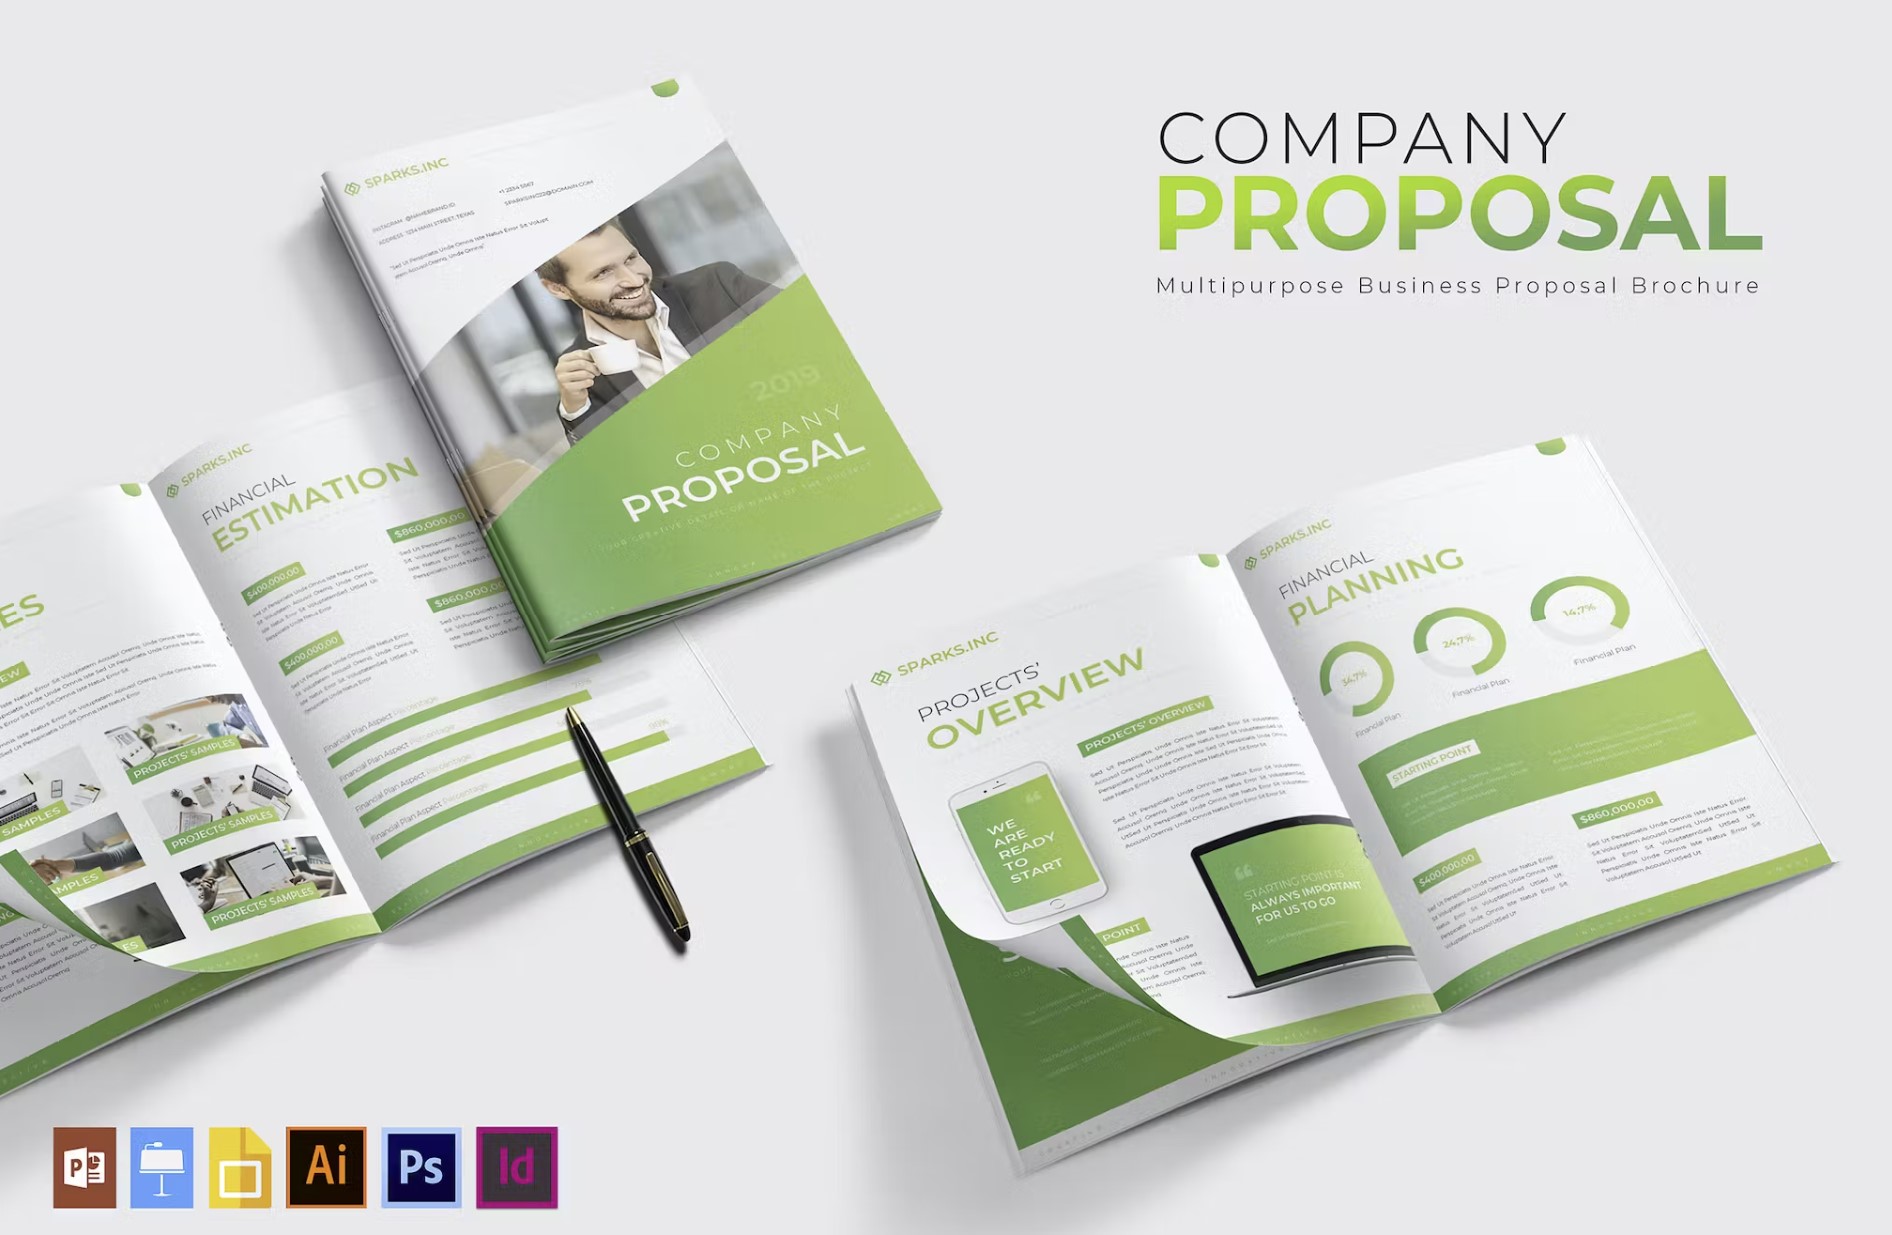 Business Proposal Template 2